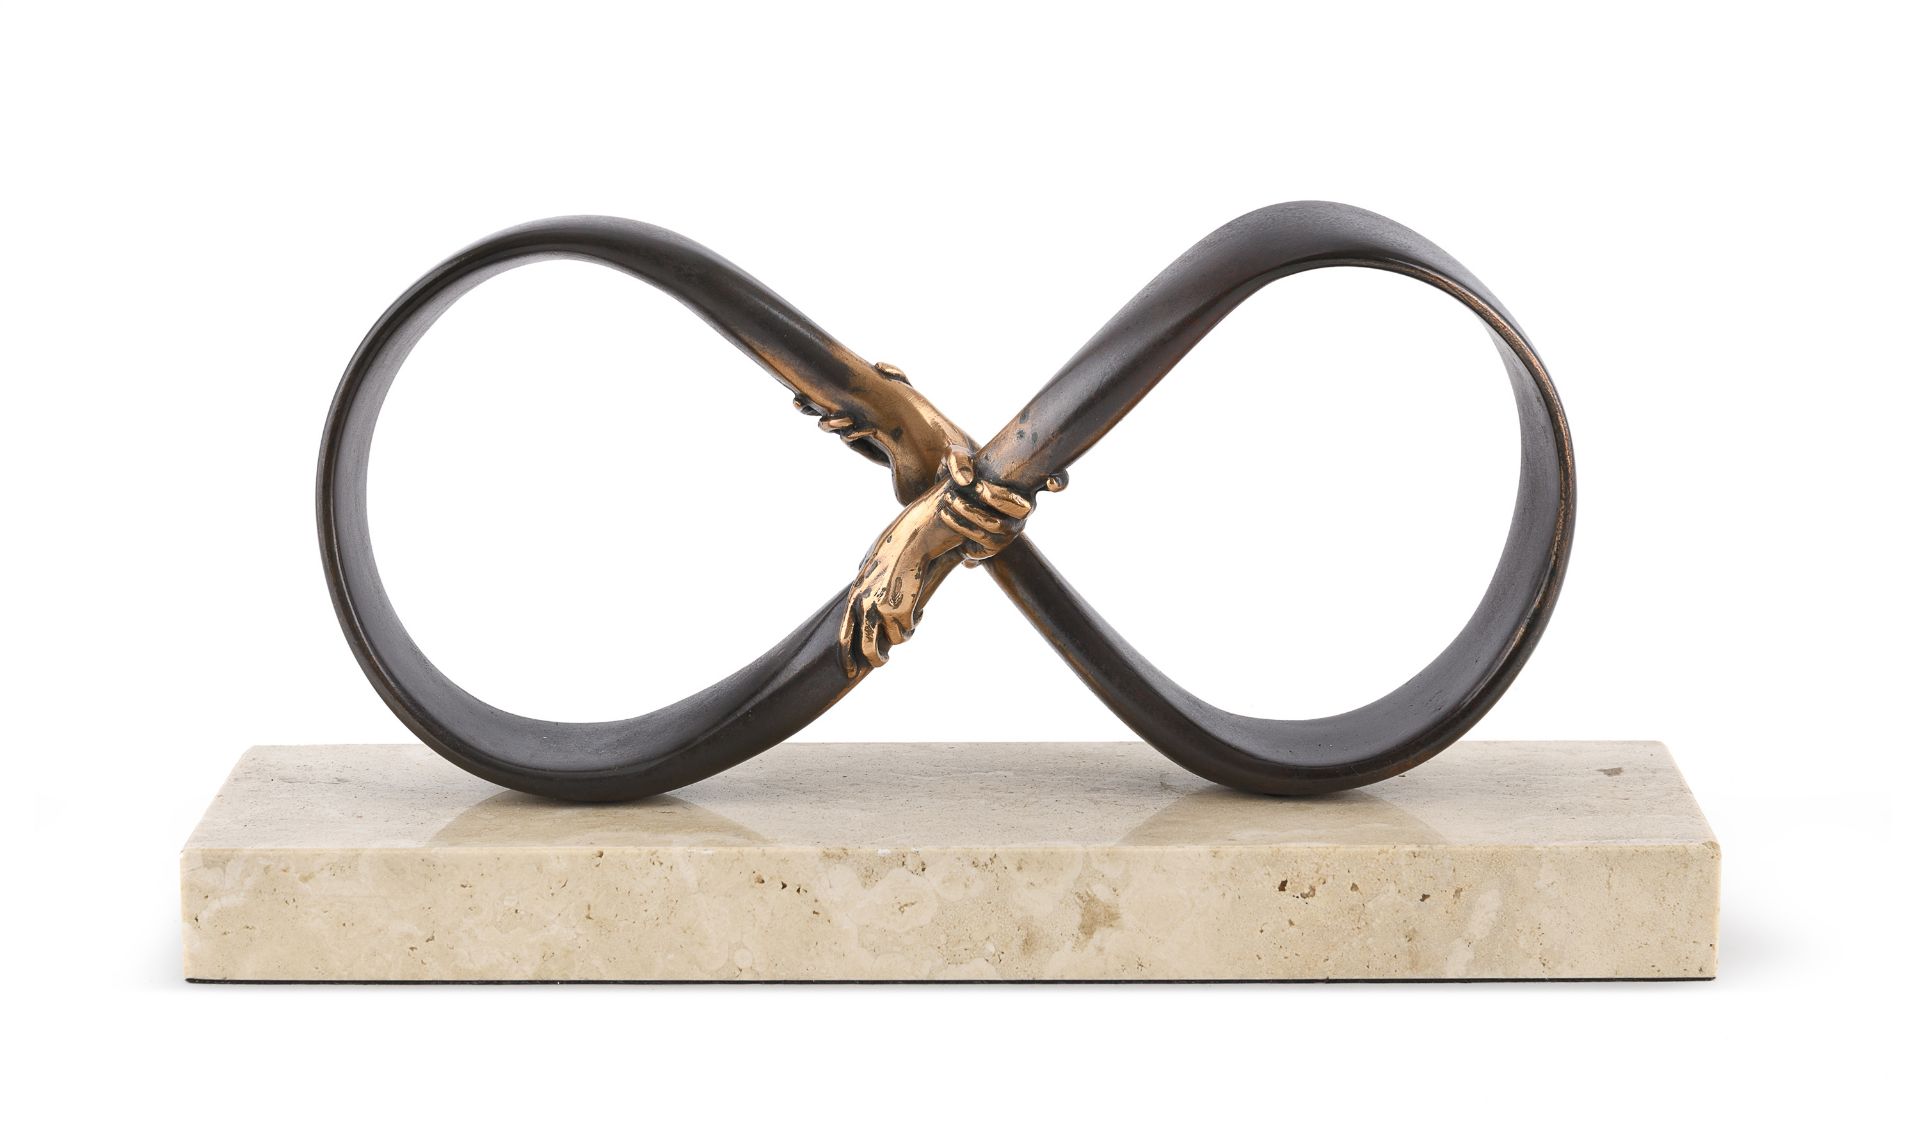 BRONZE-PLATED RESIN SCULPTURE 'INFINITY' BY LORENZO QUINN